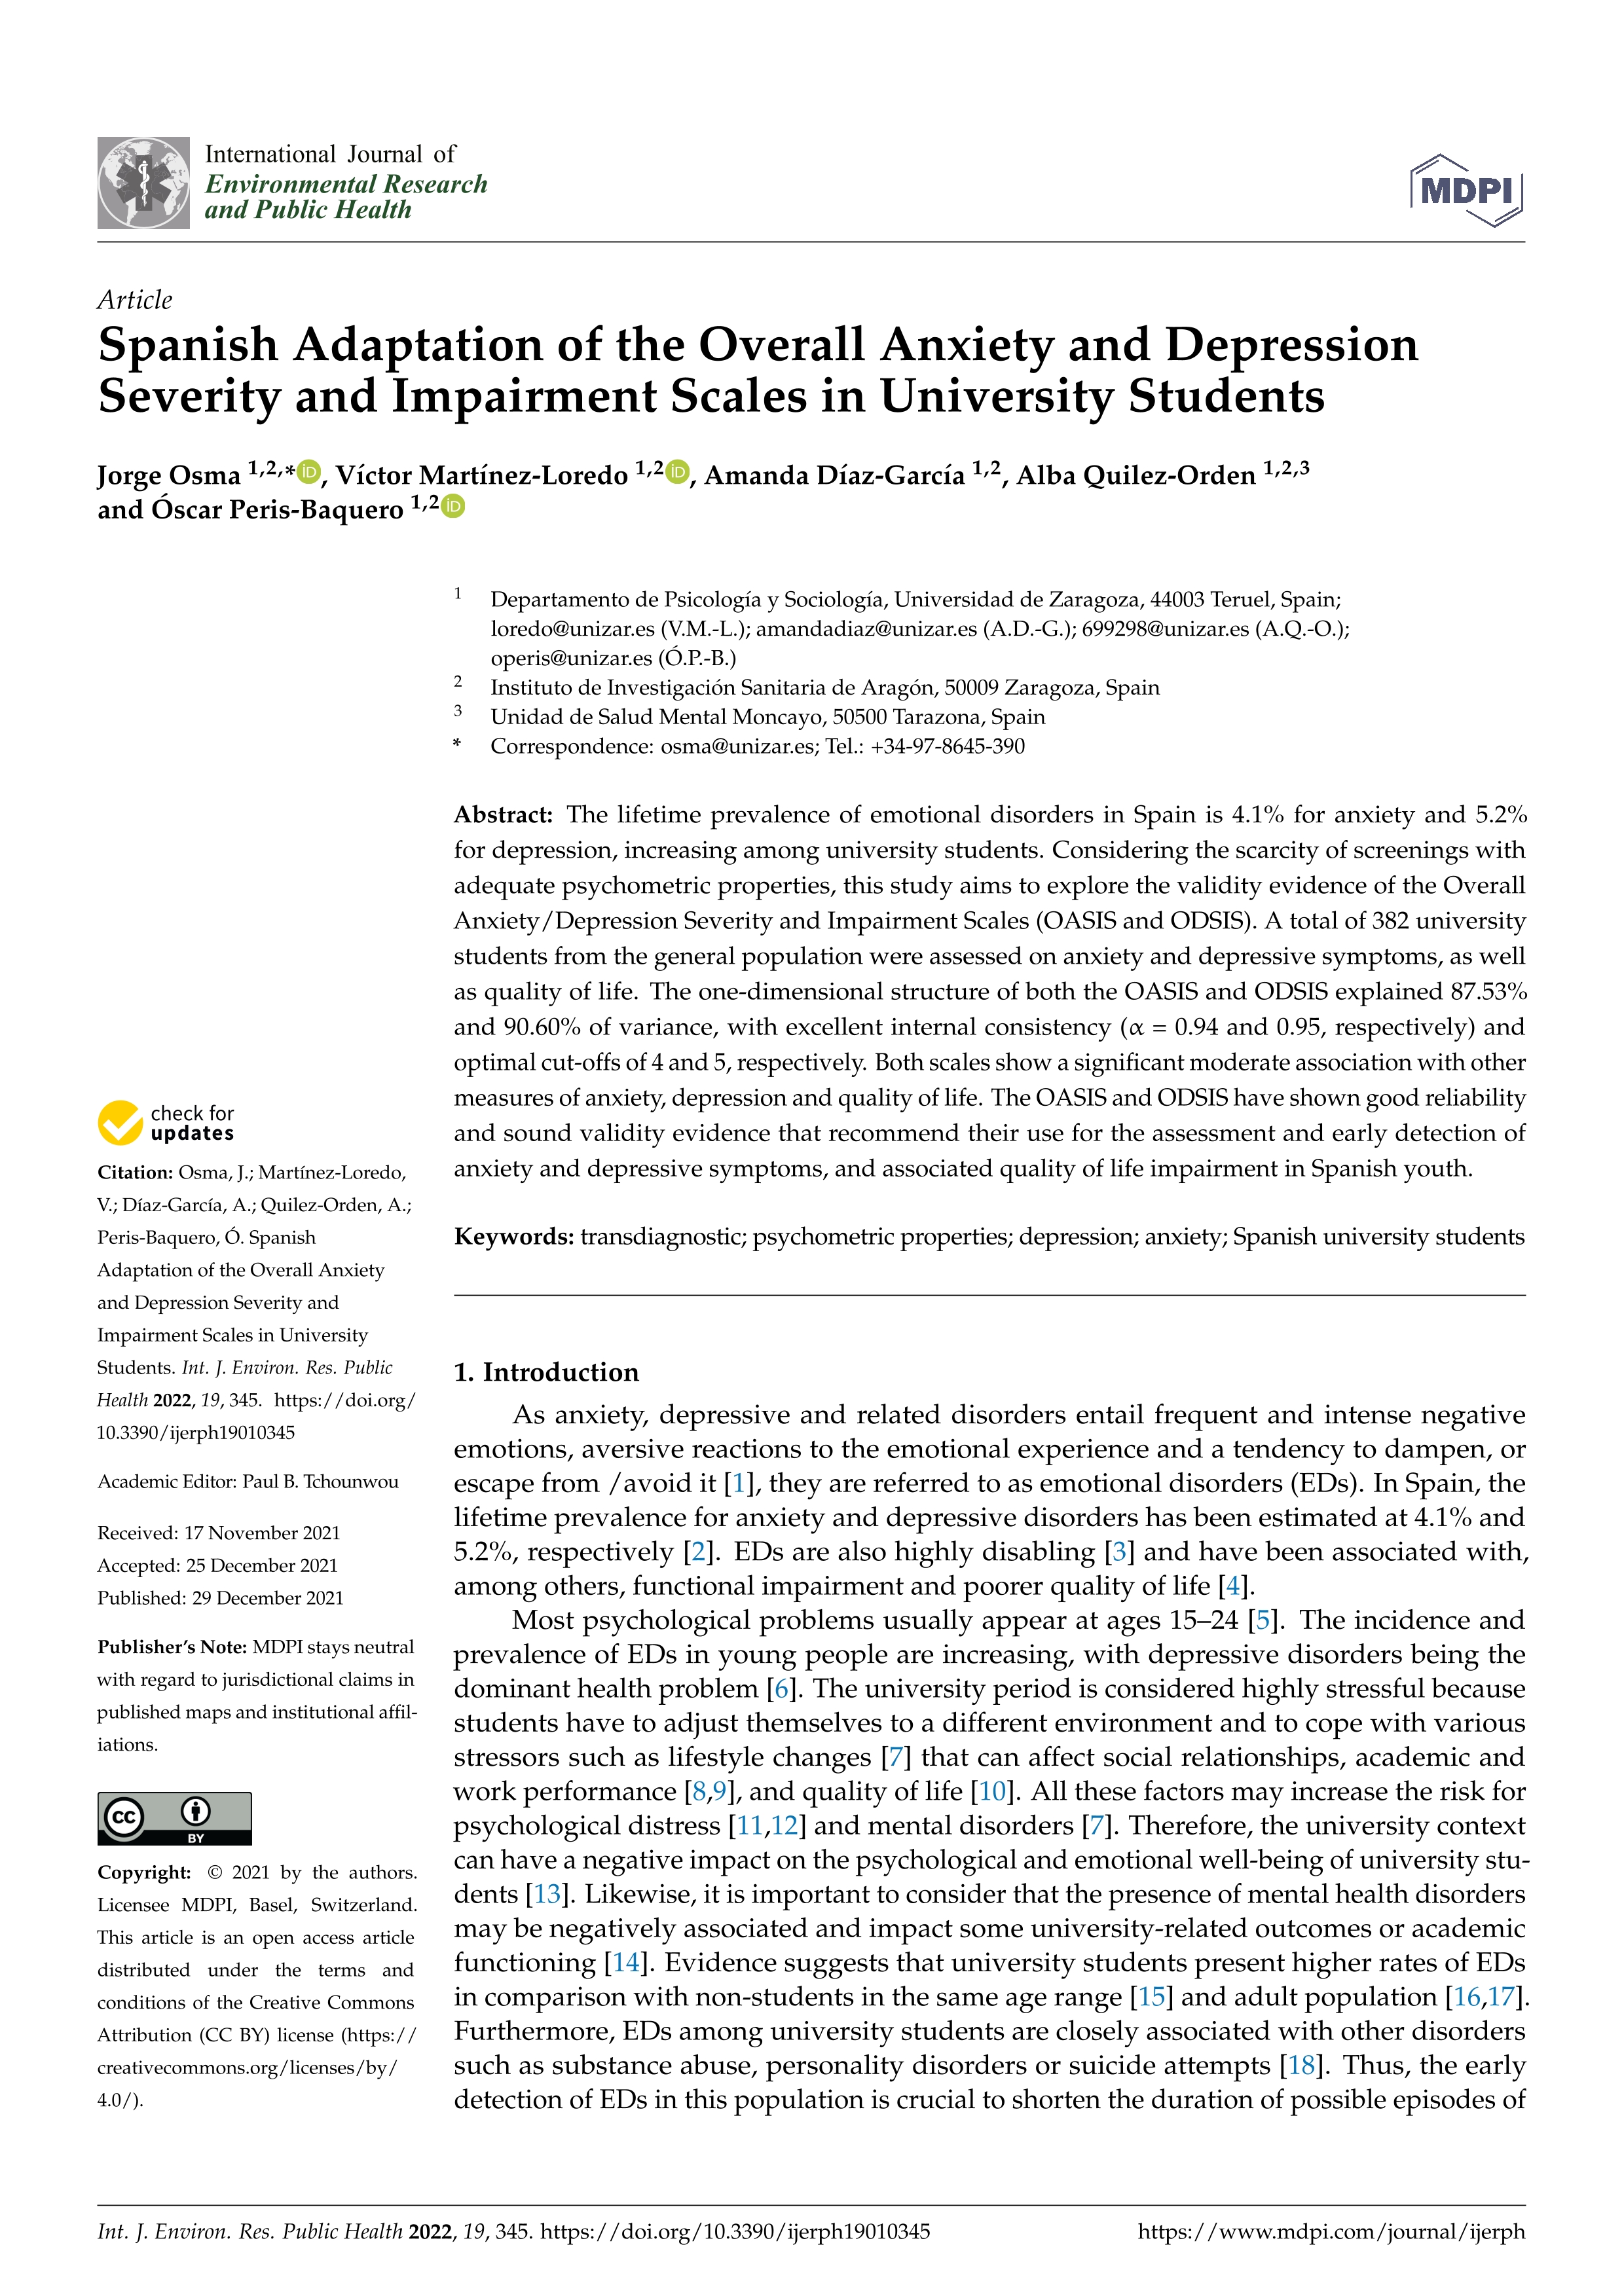 Spanish adaptation of the overall anxiety and depression severity and impairment scales in university students